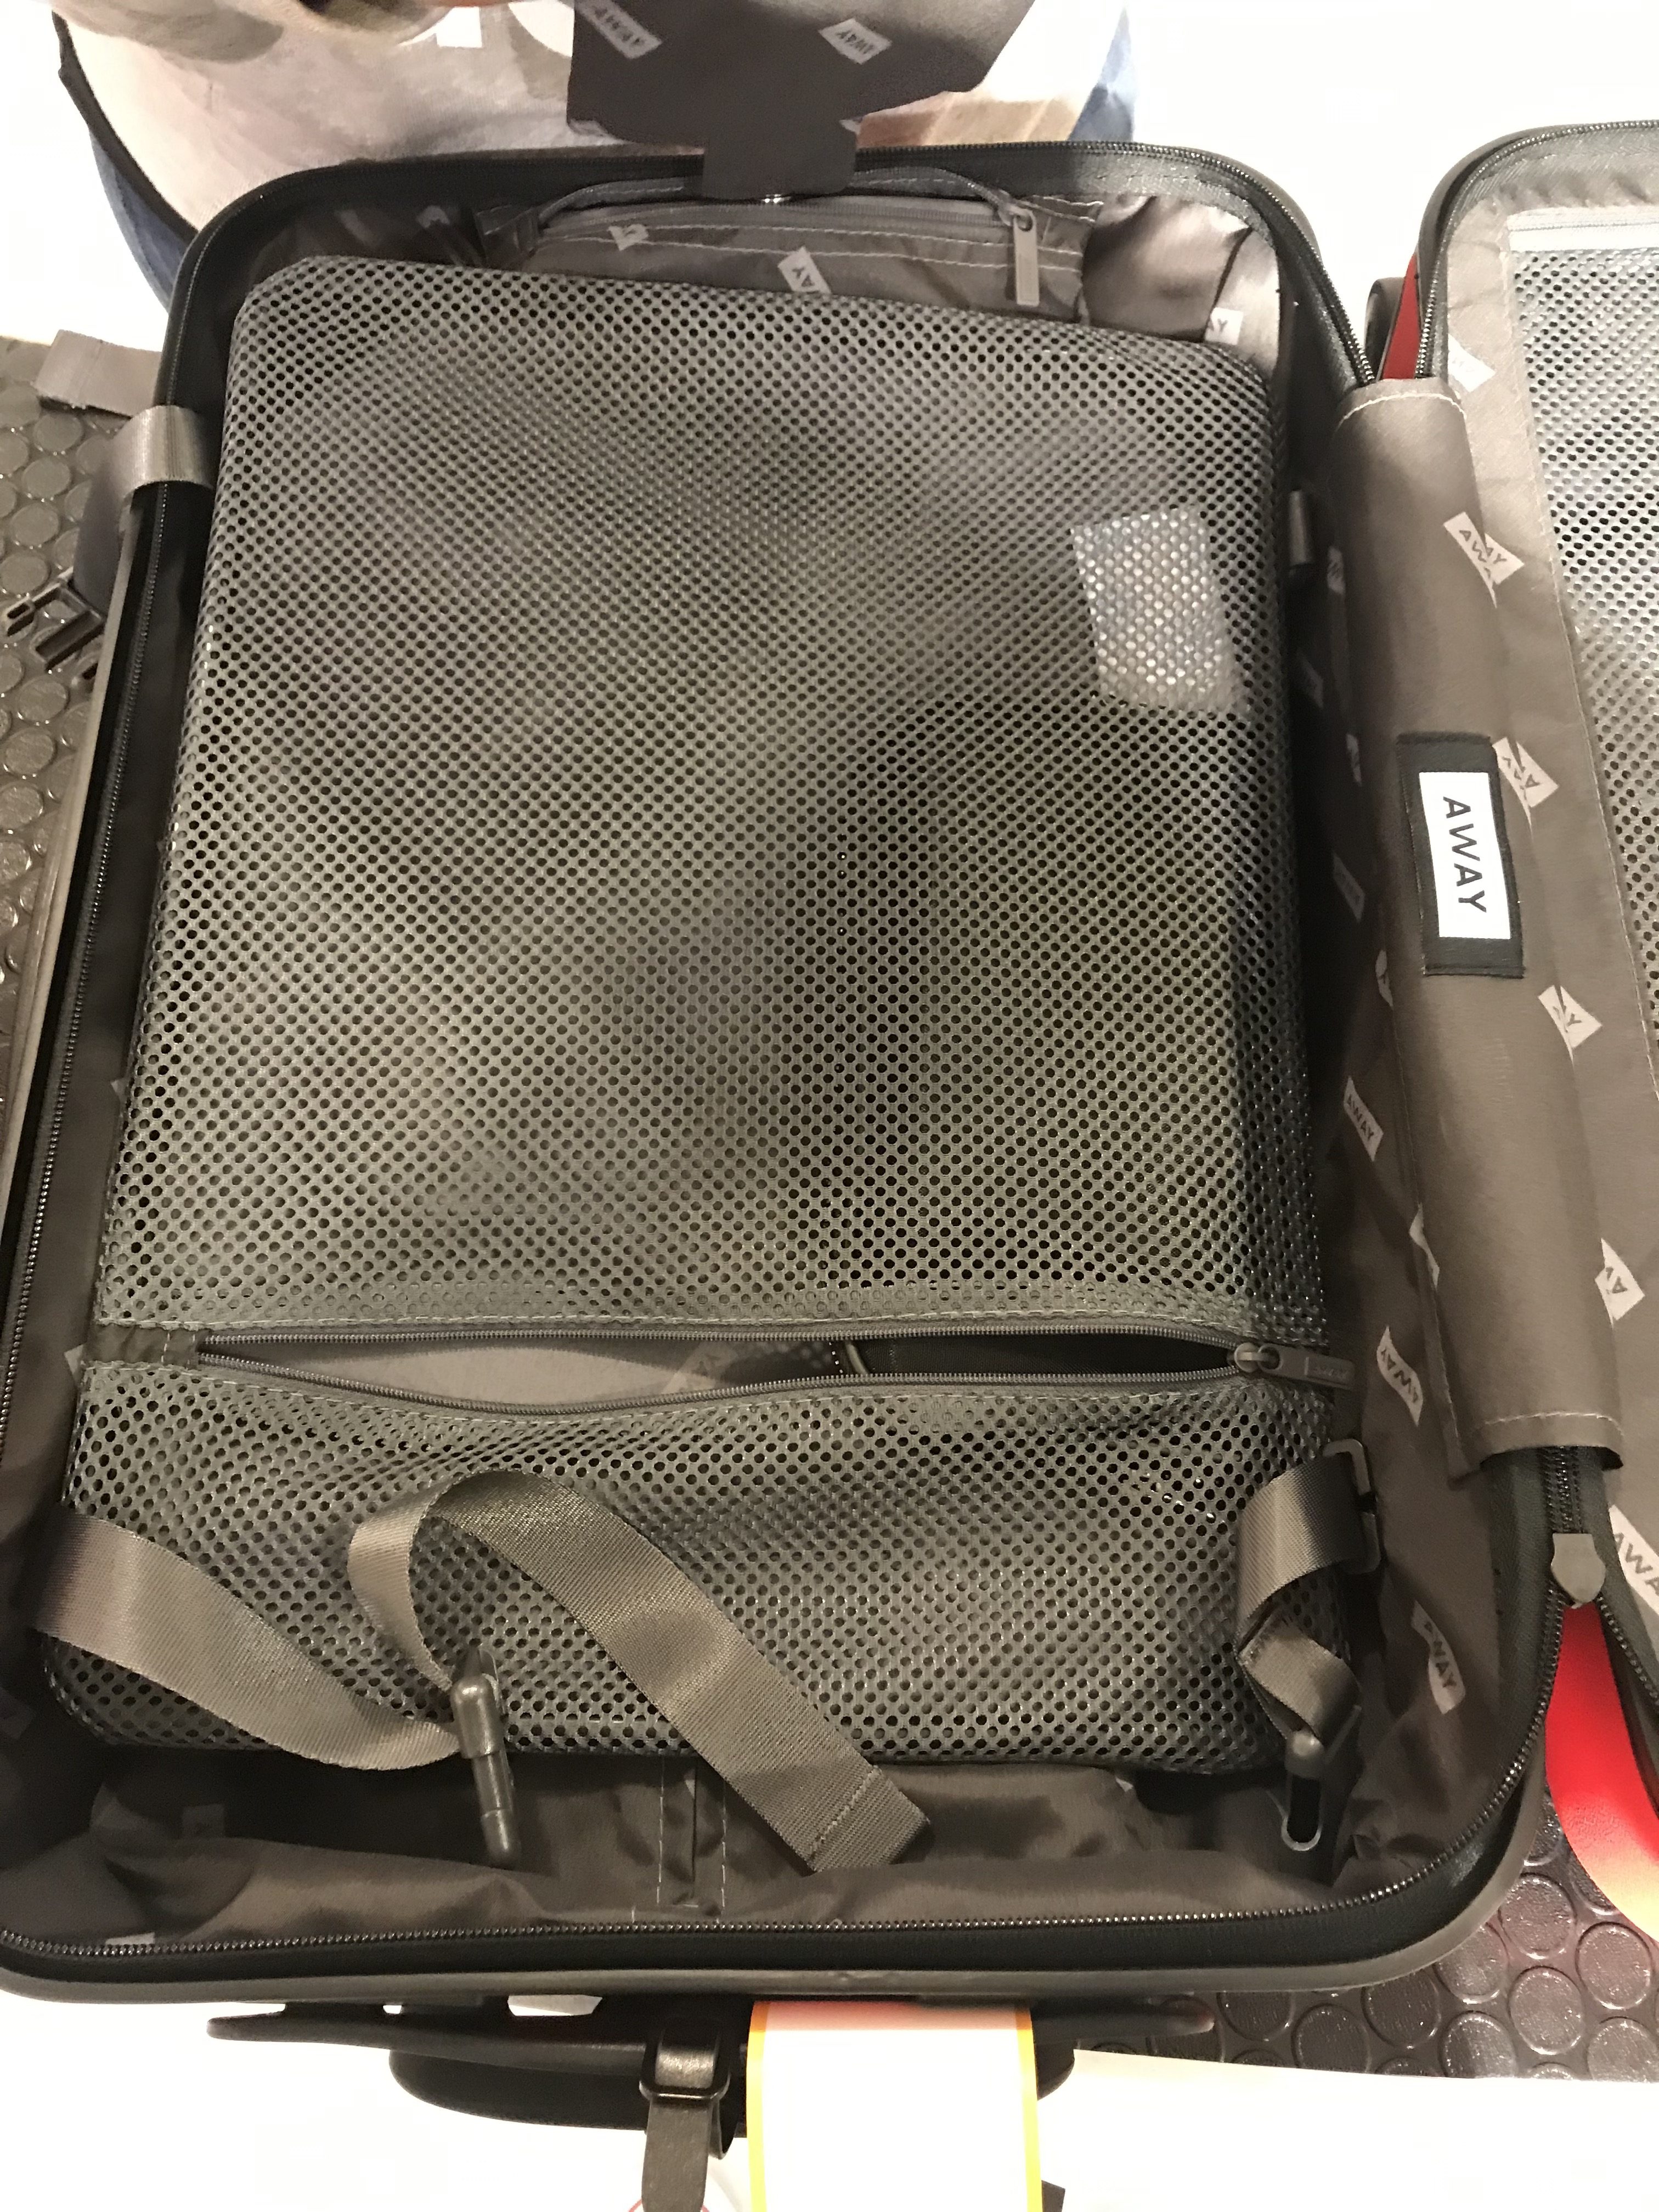 Away Carry-on Luggage Review | escapeauthority.com